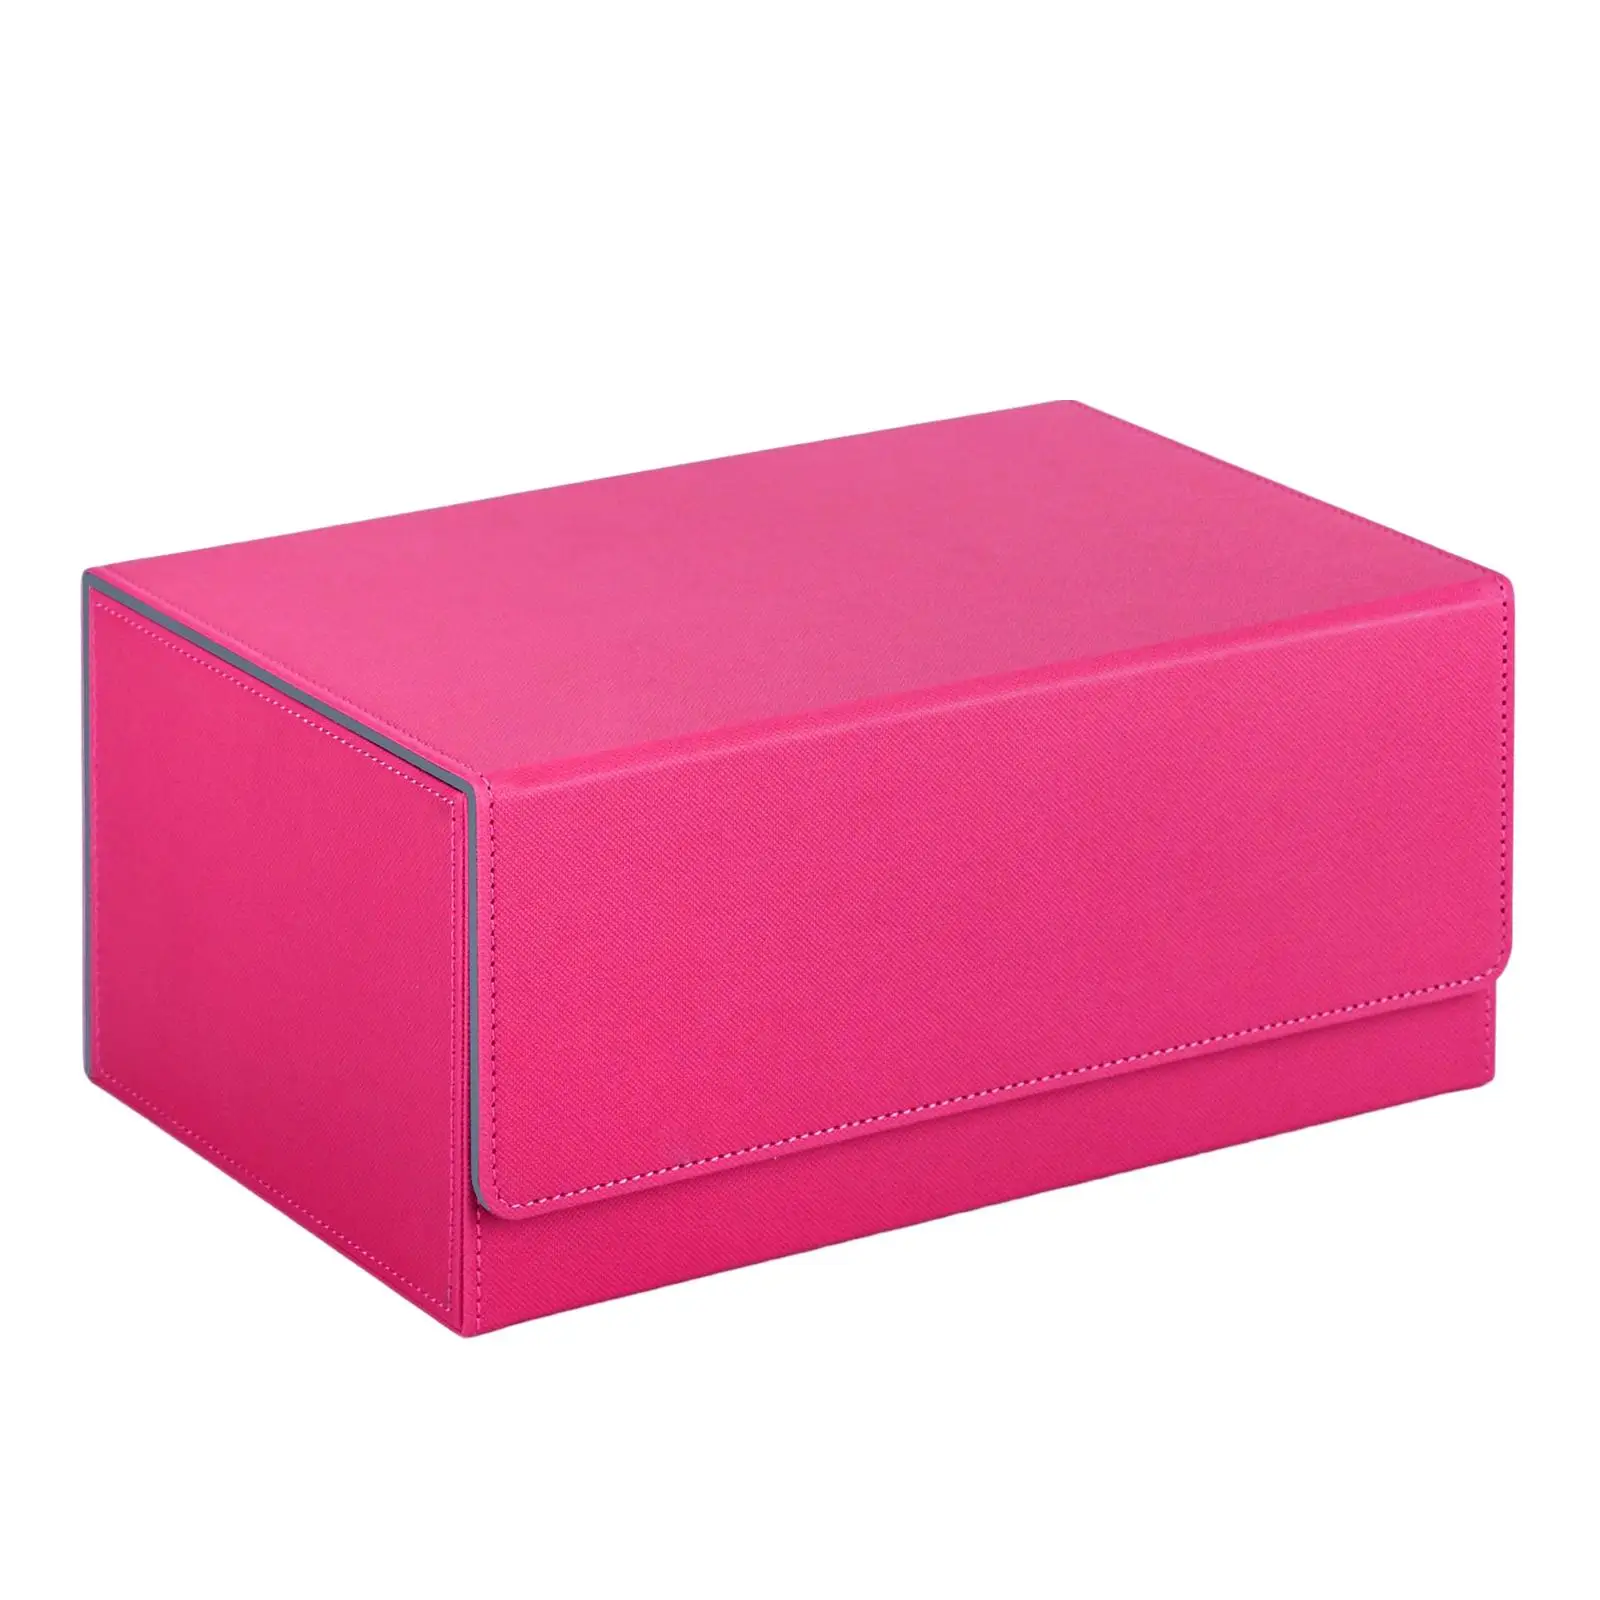 PU Leather Card Case Deck Box Sturdy with Top Open 600 Cards Keep Tidy Baseball Sports Cards